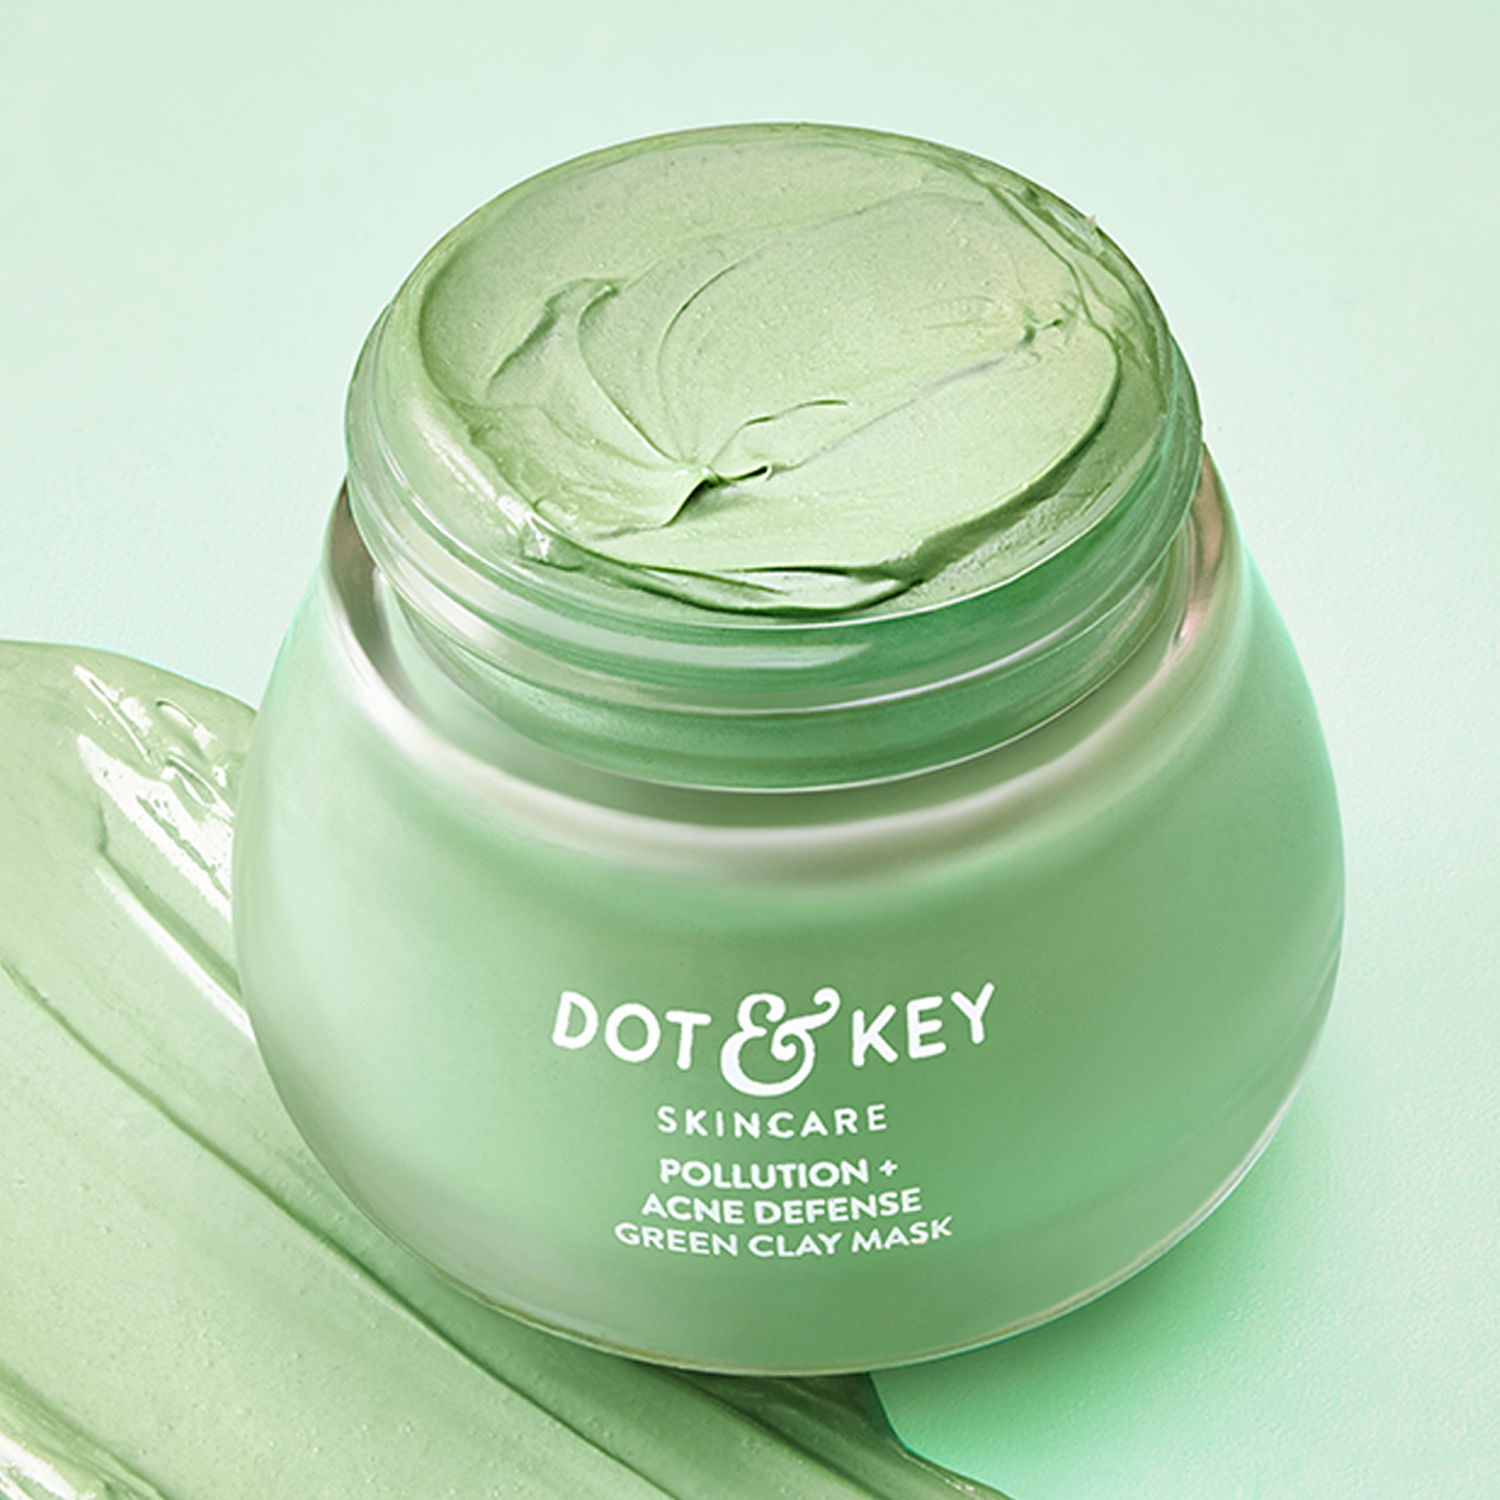 Buy Dot & Key Skin Care Pollution + Acne Defense Green Clay Mask | With Salicylic Acid, Matcha Tea | For Dark Spots, Oily, Acne Prone Skin | 85g - Purplle